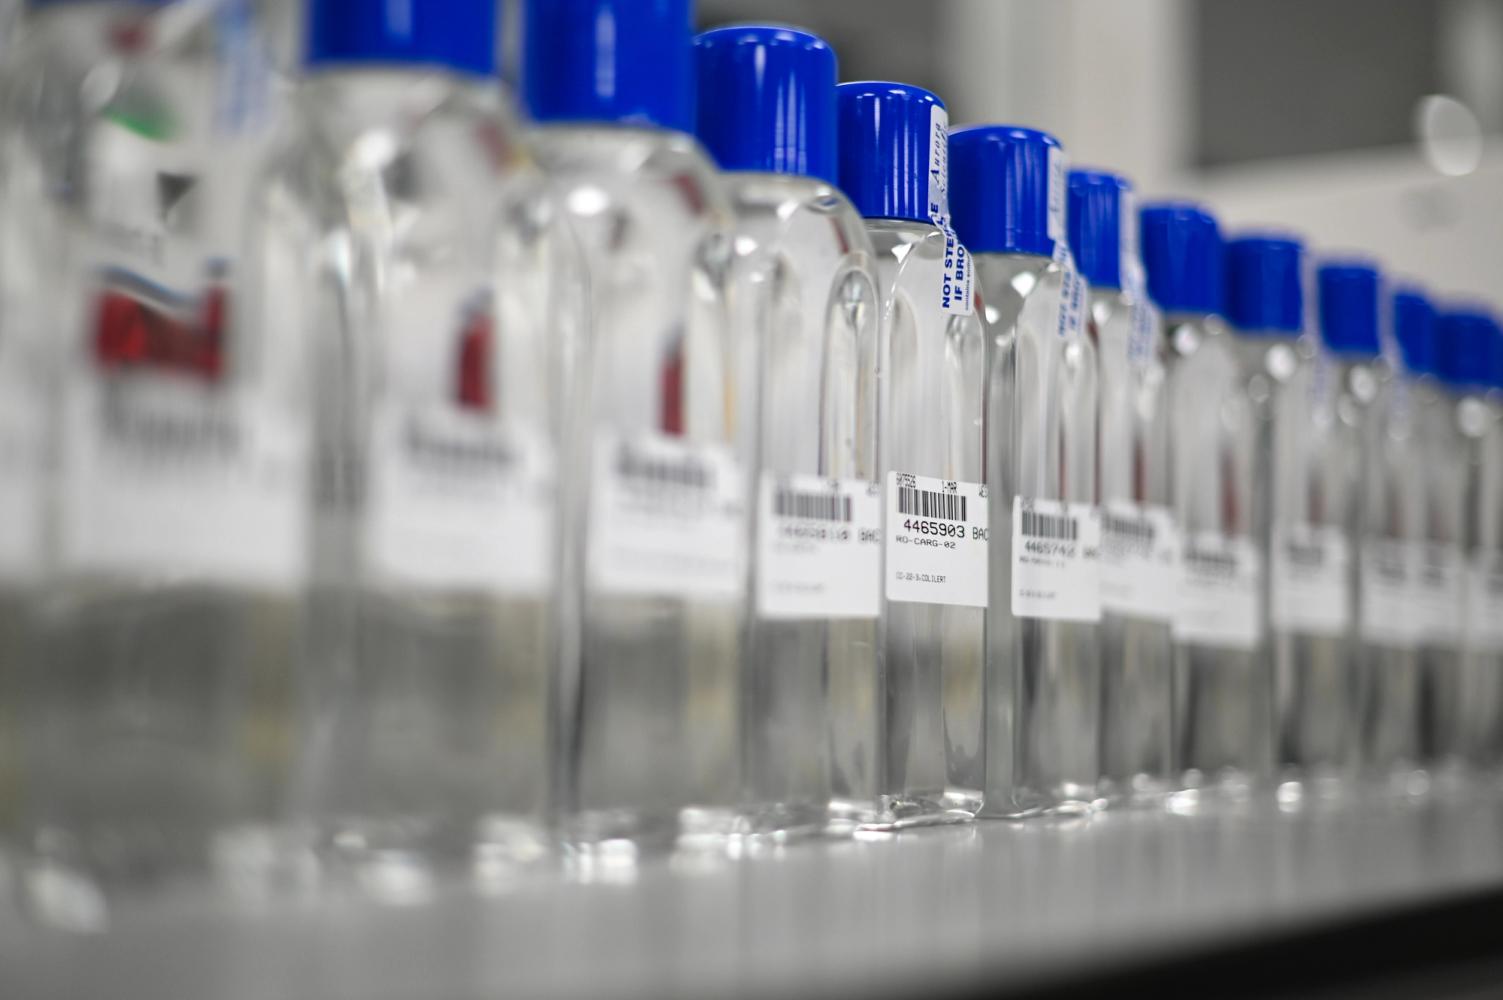 Photograph of sampled water bottles at the SEW laboratory 